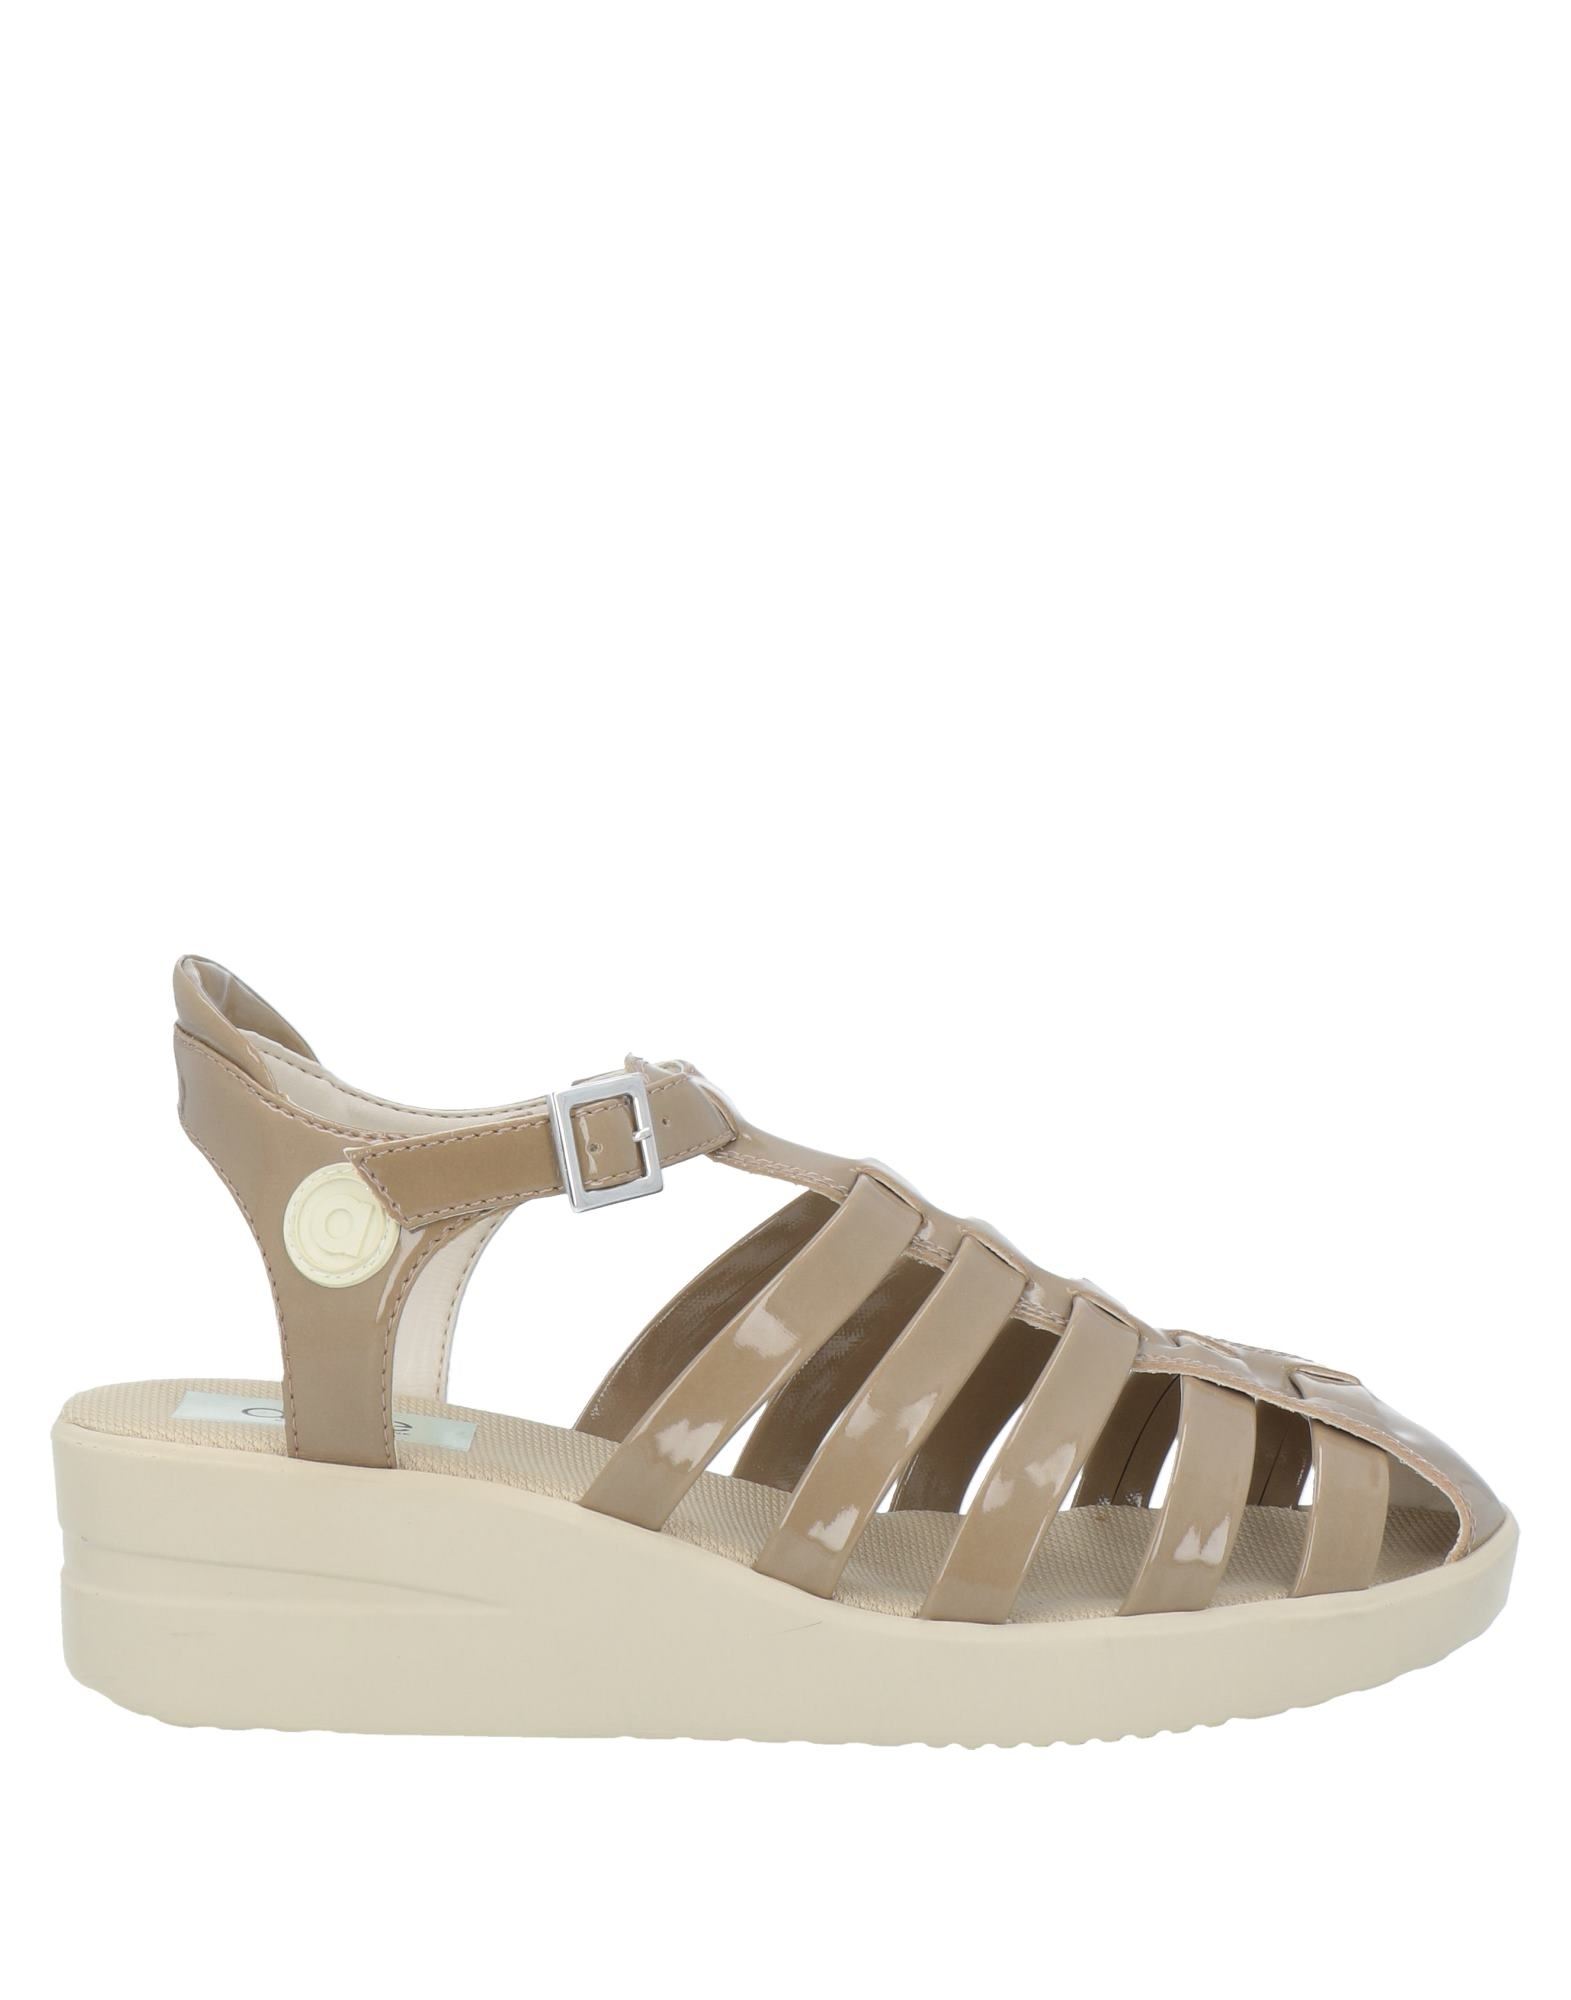 AGILE by RUCOLINE Sandals